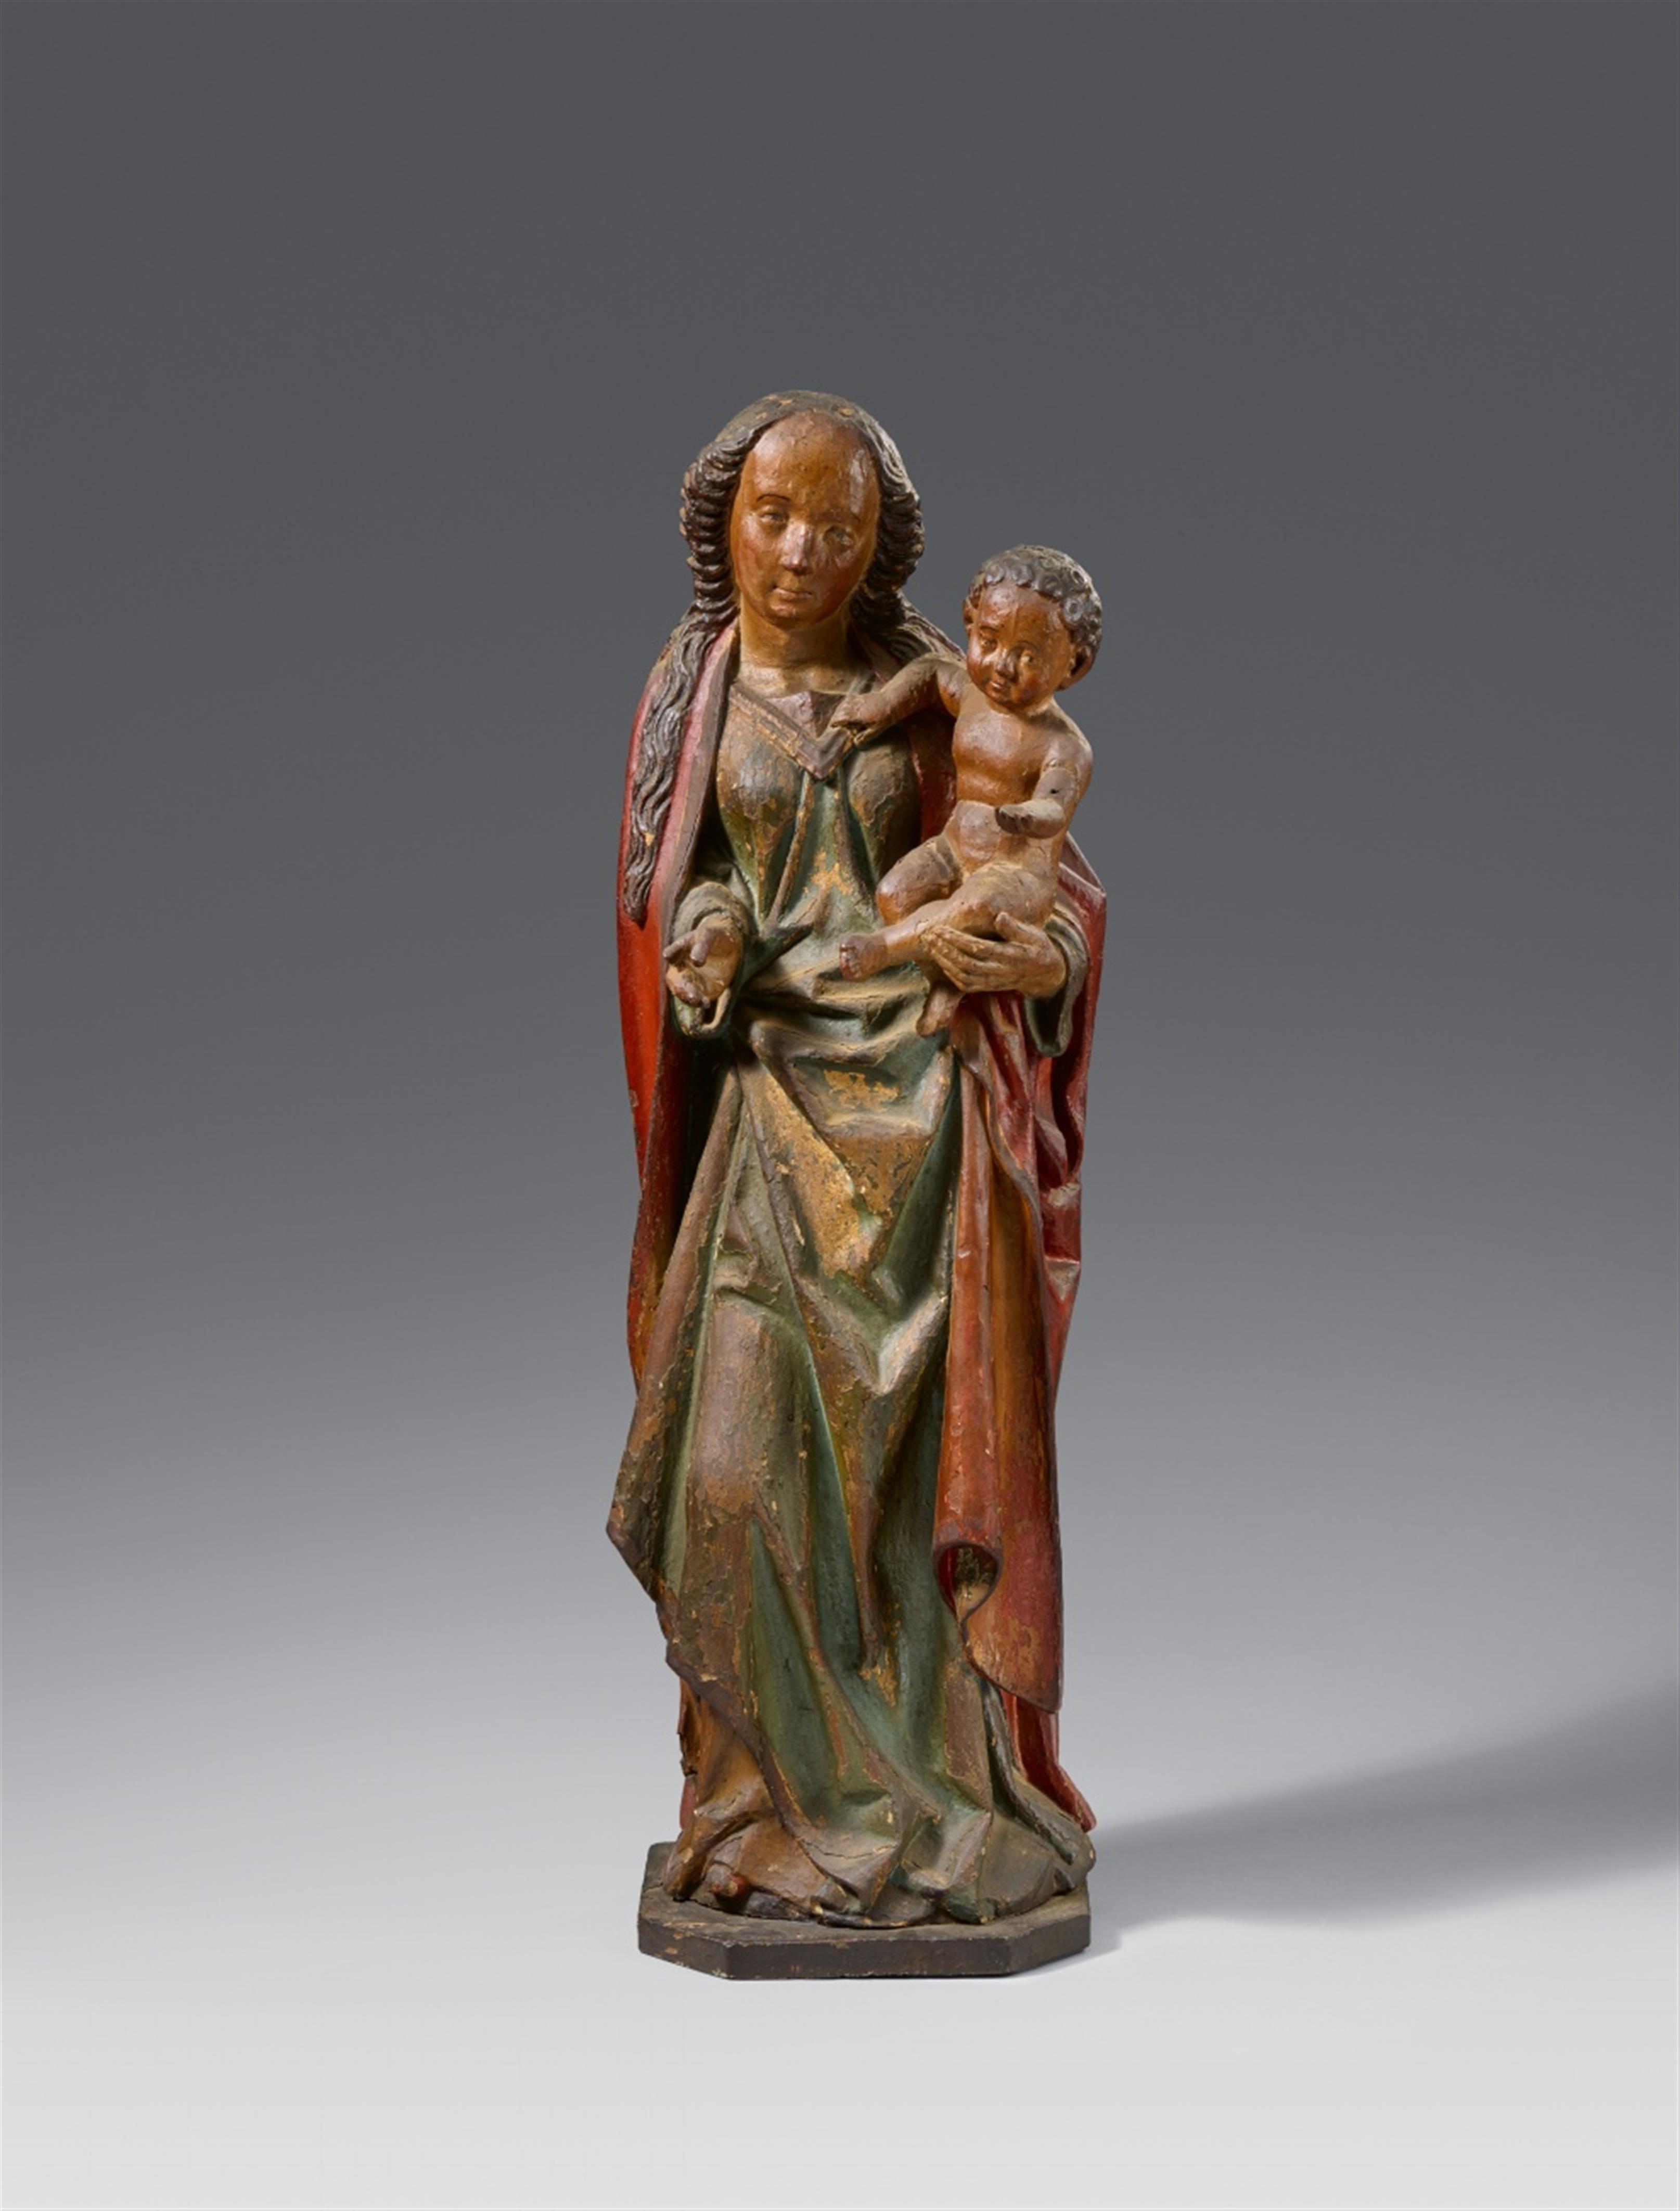 Lower Rhine Region 2nd half 15th century - A carved wooden figure of the Virgin and Child, Lower Rhine Region, second half 15th century - image-1